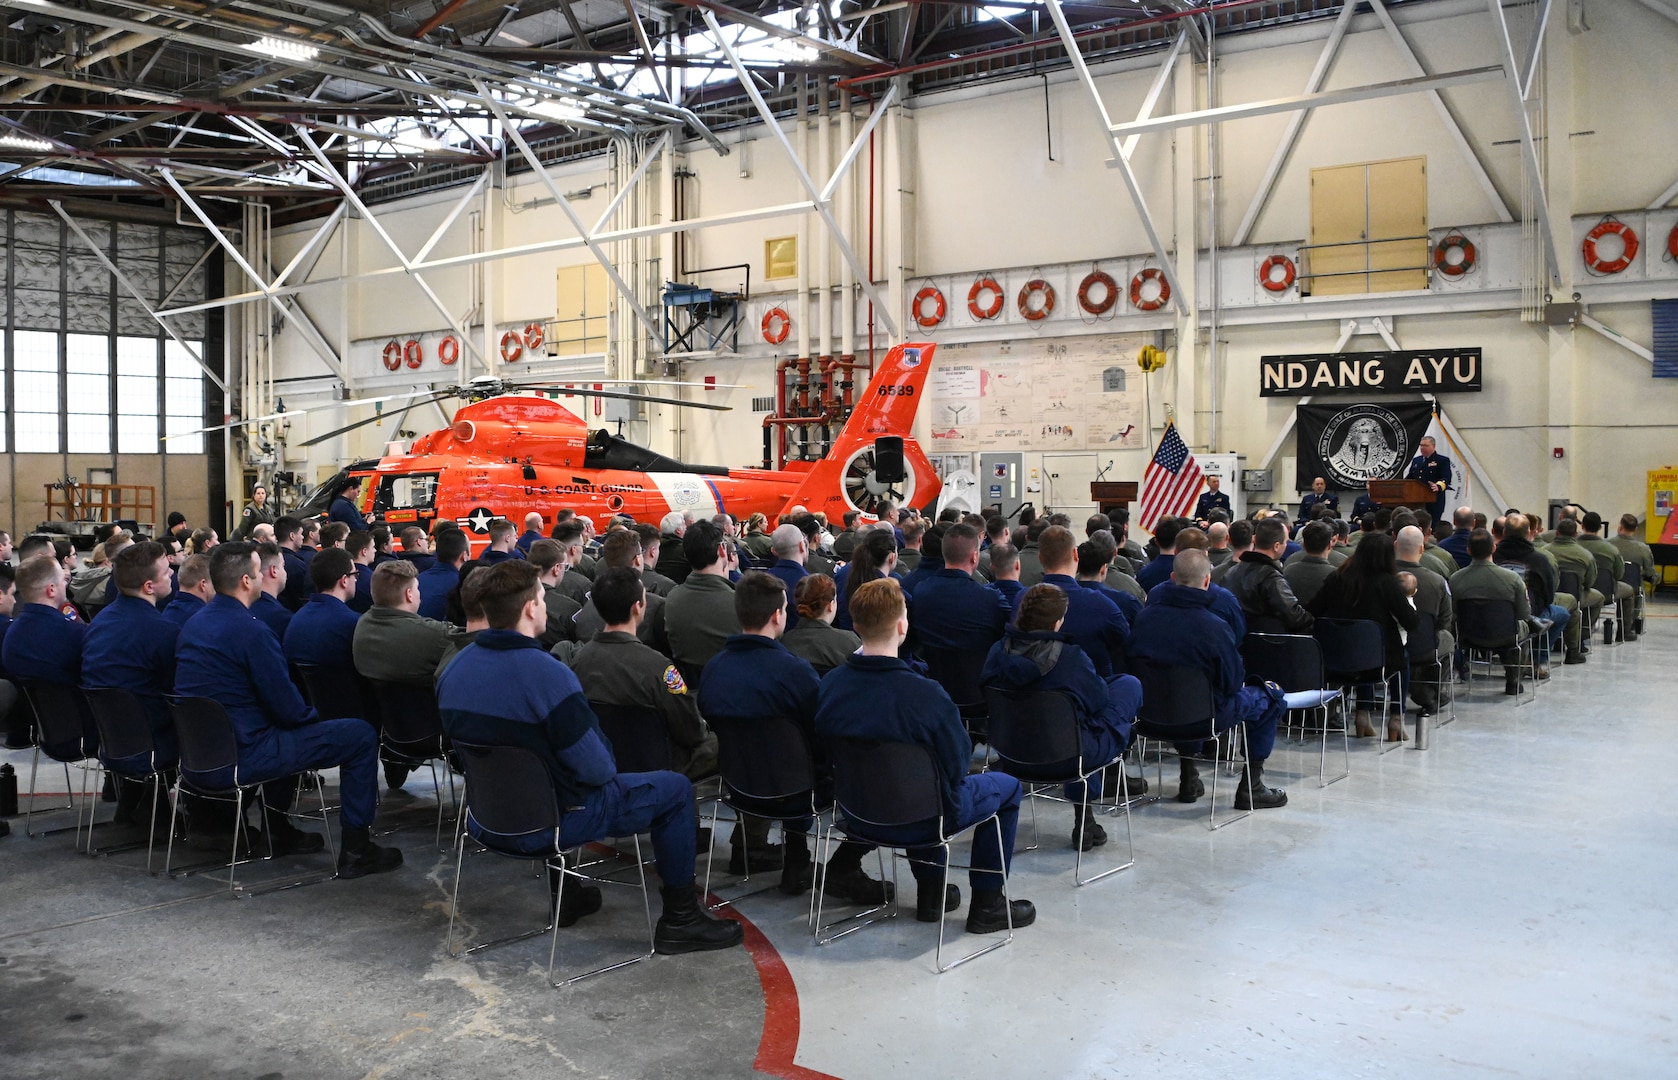 Members of Air Station Kodiak attend a ceremony to retire the MH-65 Dolphin helicopter airframe at Air Station Kodiak, April 23, 2024. Air Station Kodiak will be the fourth Coast Guard Air Station to transition to a single rotary-wing ship and shore-based fleet of nine MH-60 Jayhawks in 2025. (U.S. Coast Guard photo by Petty Officer Second Class Ian Gray)